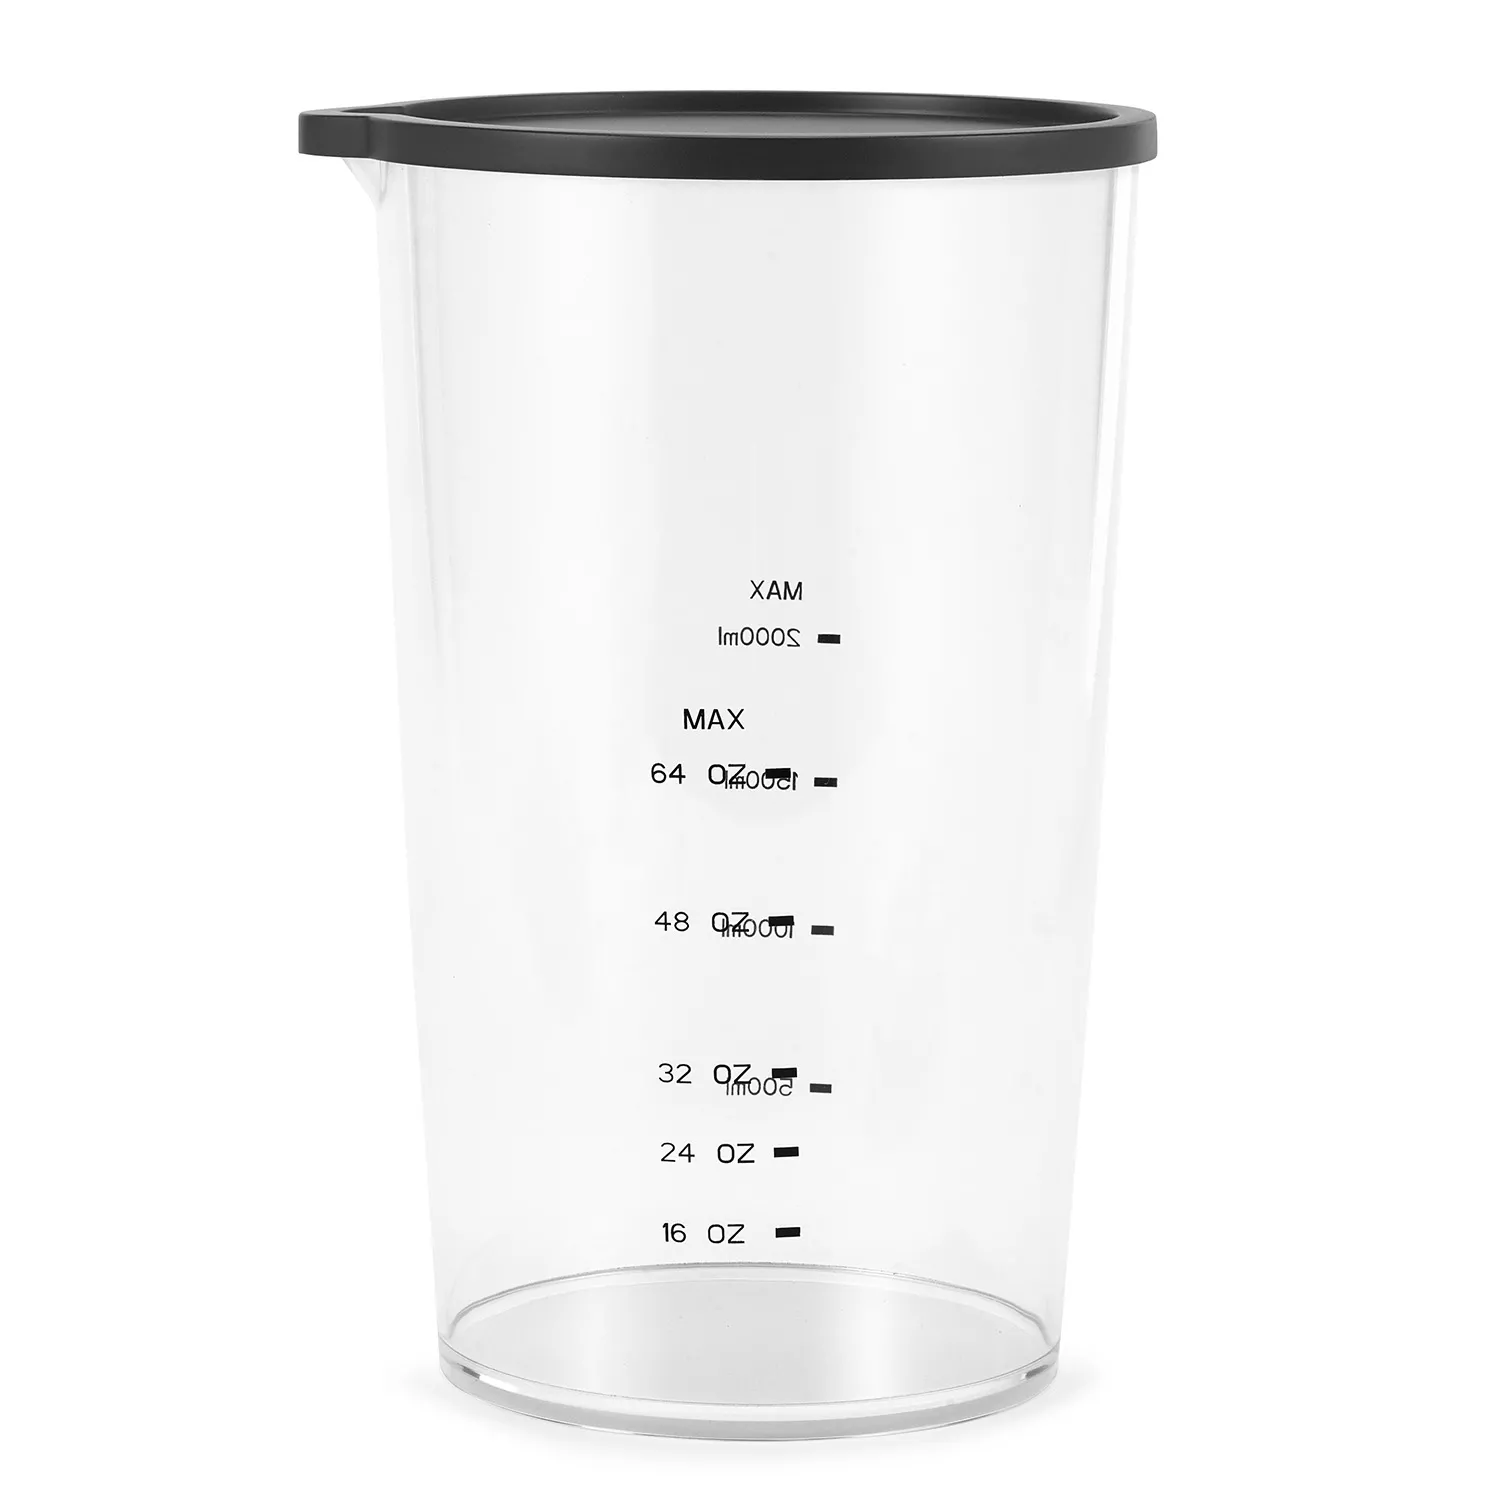 Cuisinart Smart Stick Measuring Cup 500ml - 16 oz - 2 Cups Replacement